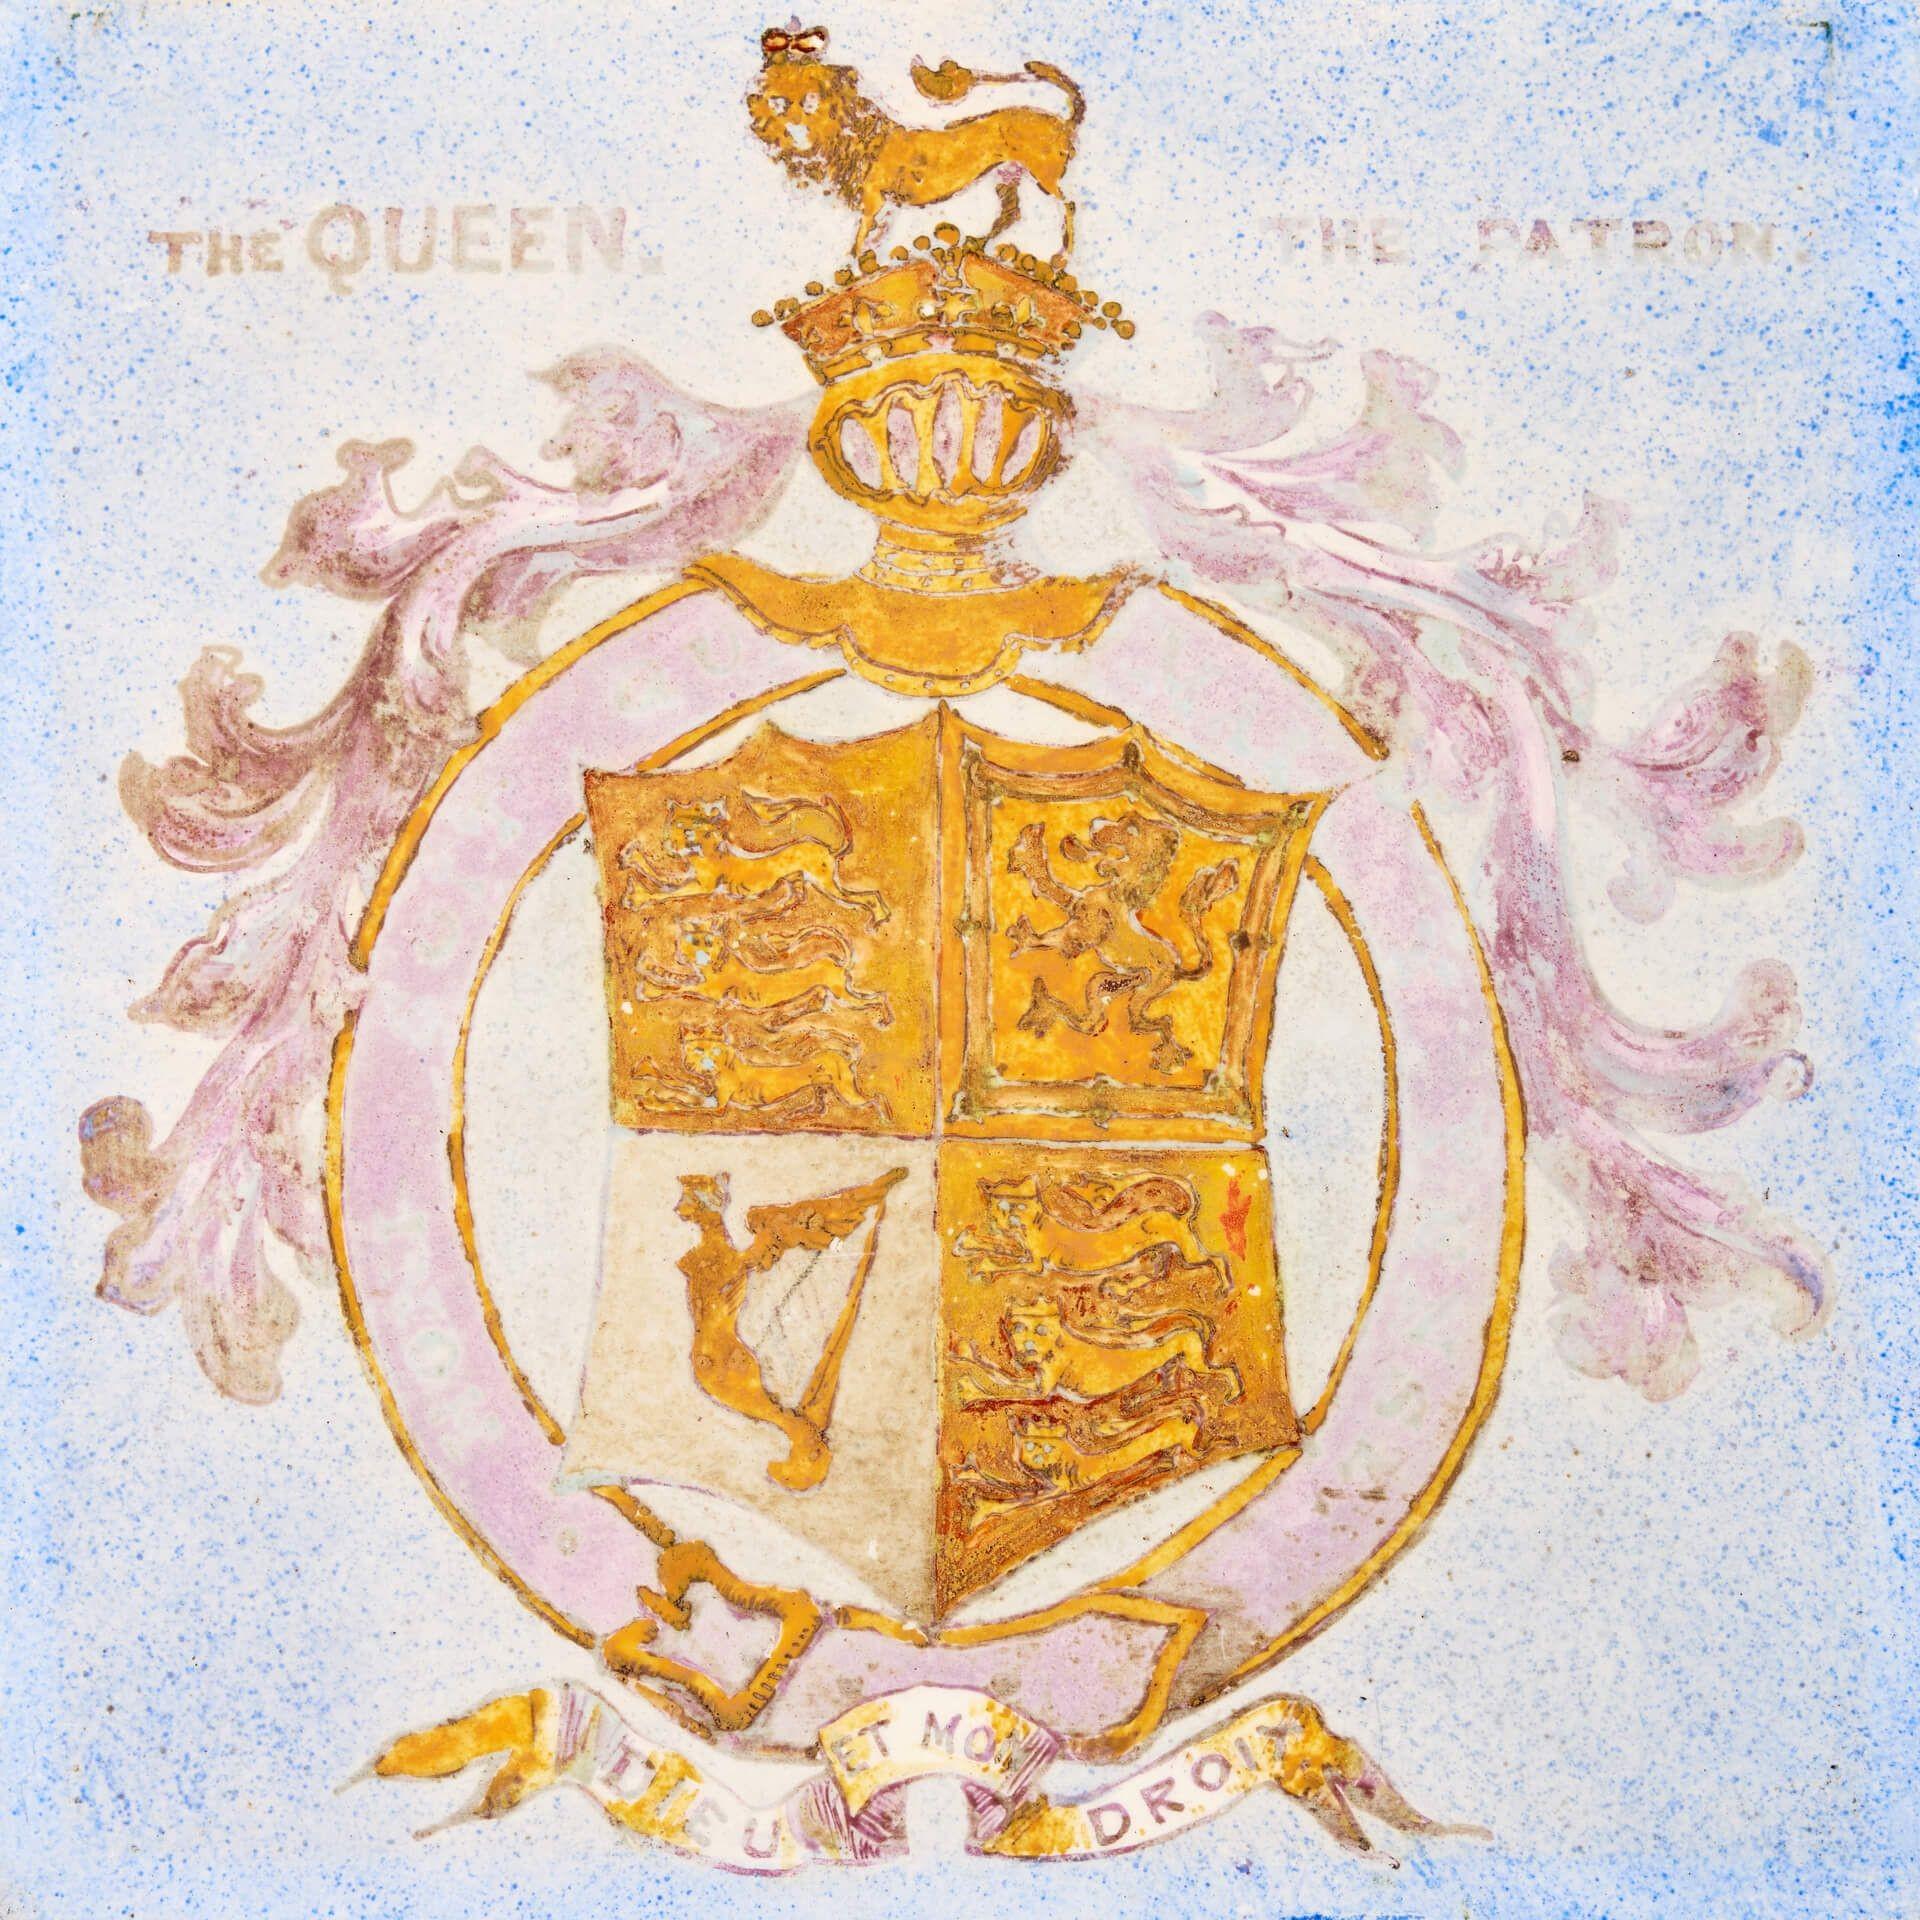 A hand decorated antique English heraldic tile depicting the coat of arms of Queen Victoria, dating from 1881. This porcelain tile is one of 14 similar we are selling removed from the now demolished Victorian Brompton Military Hospital Library,